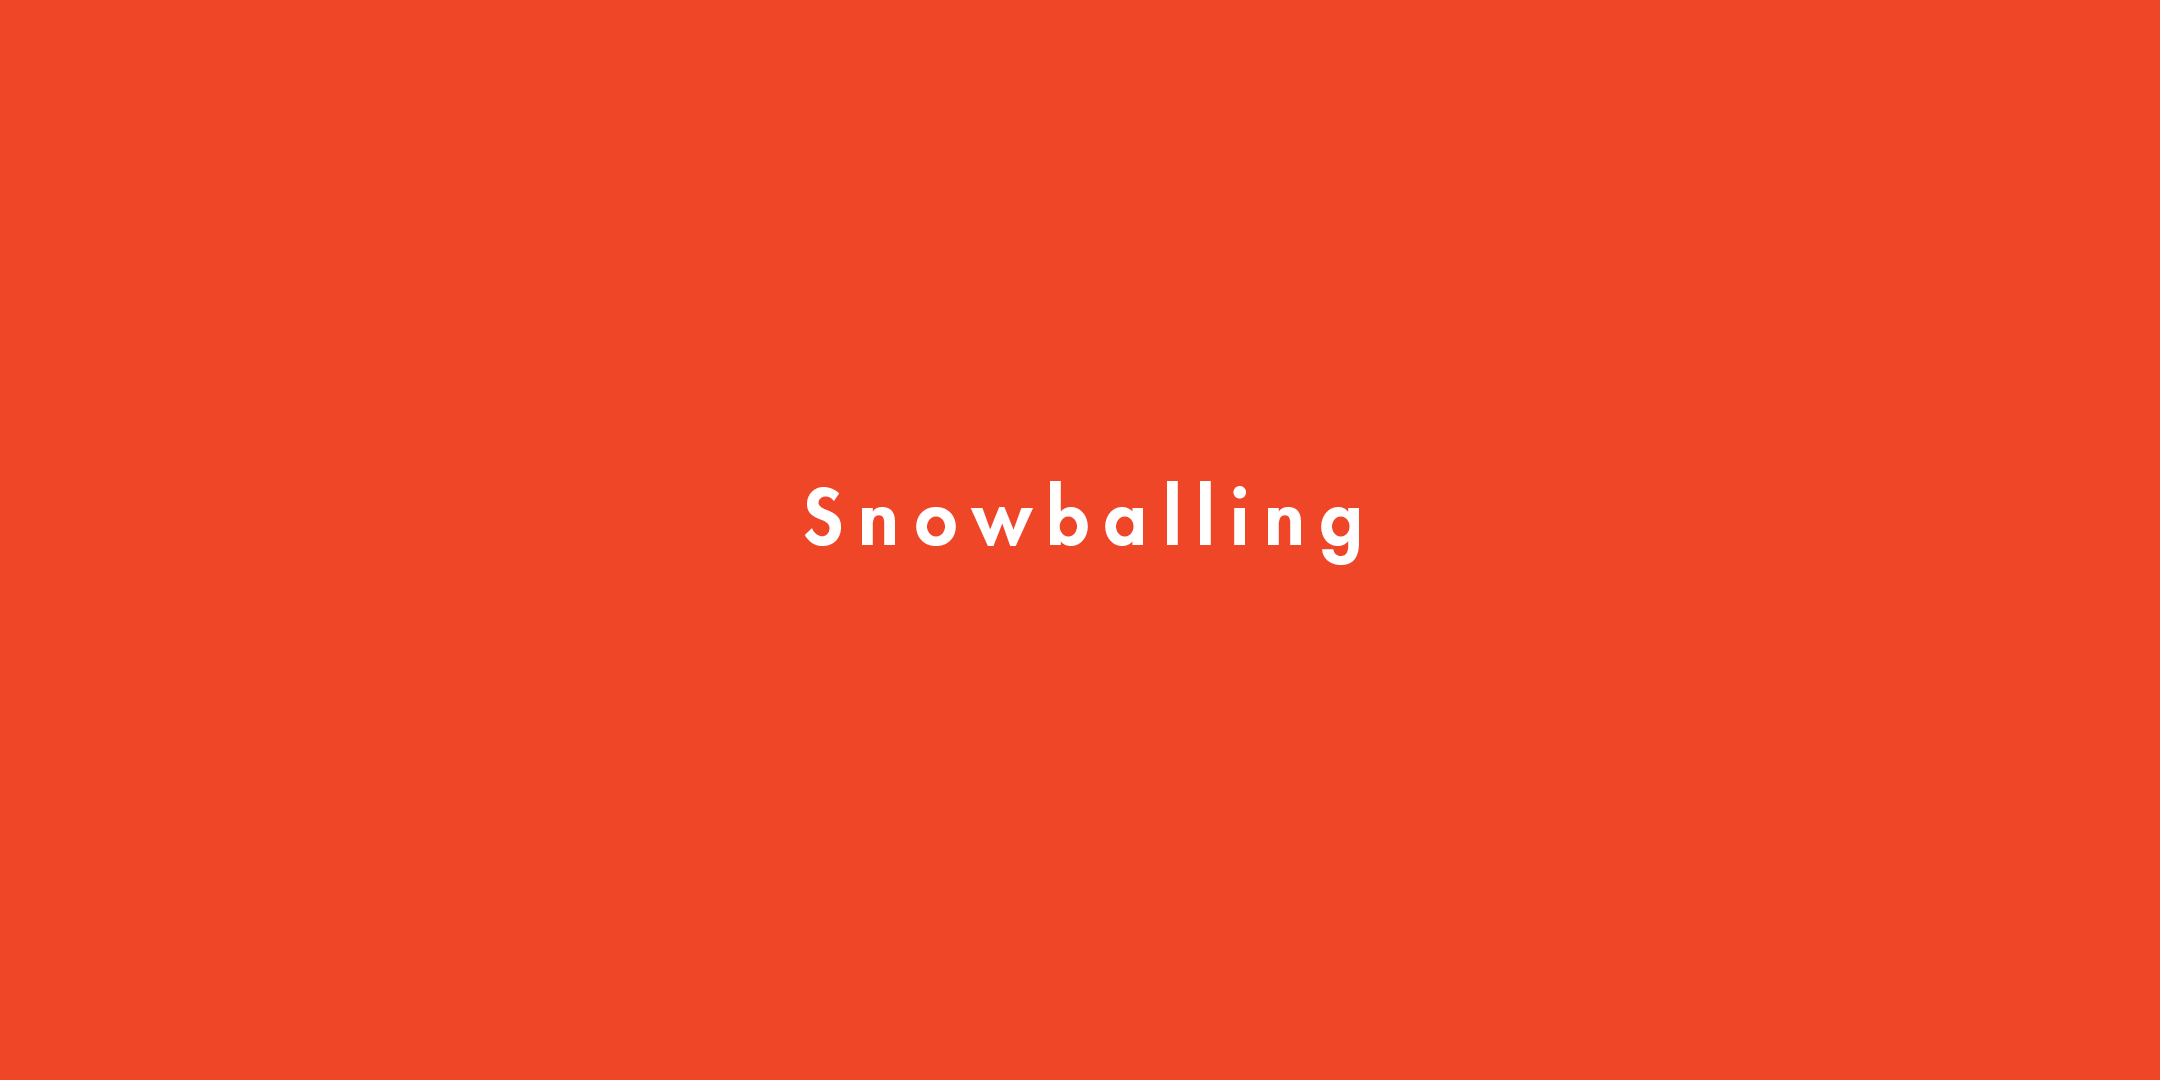 What Is Snowballing photo